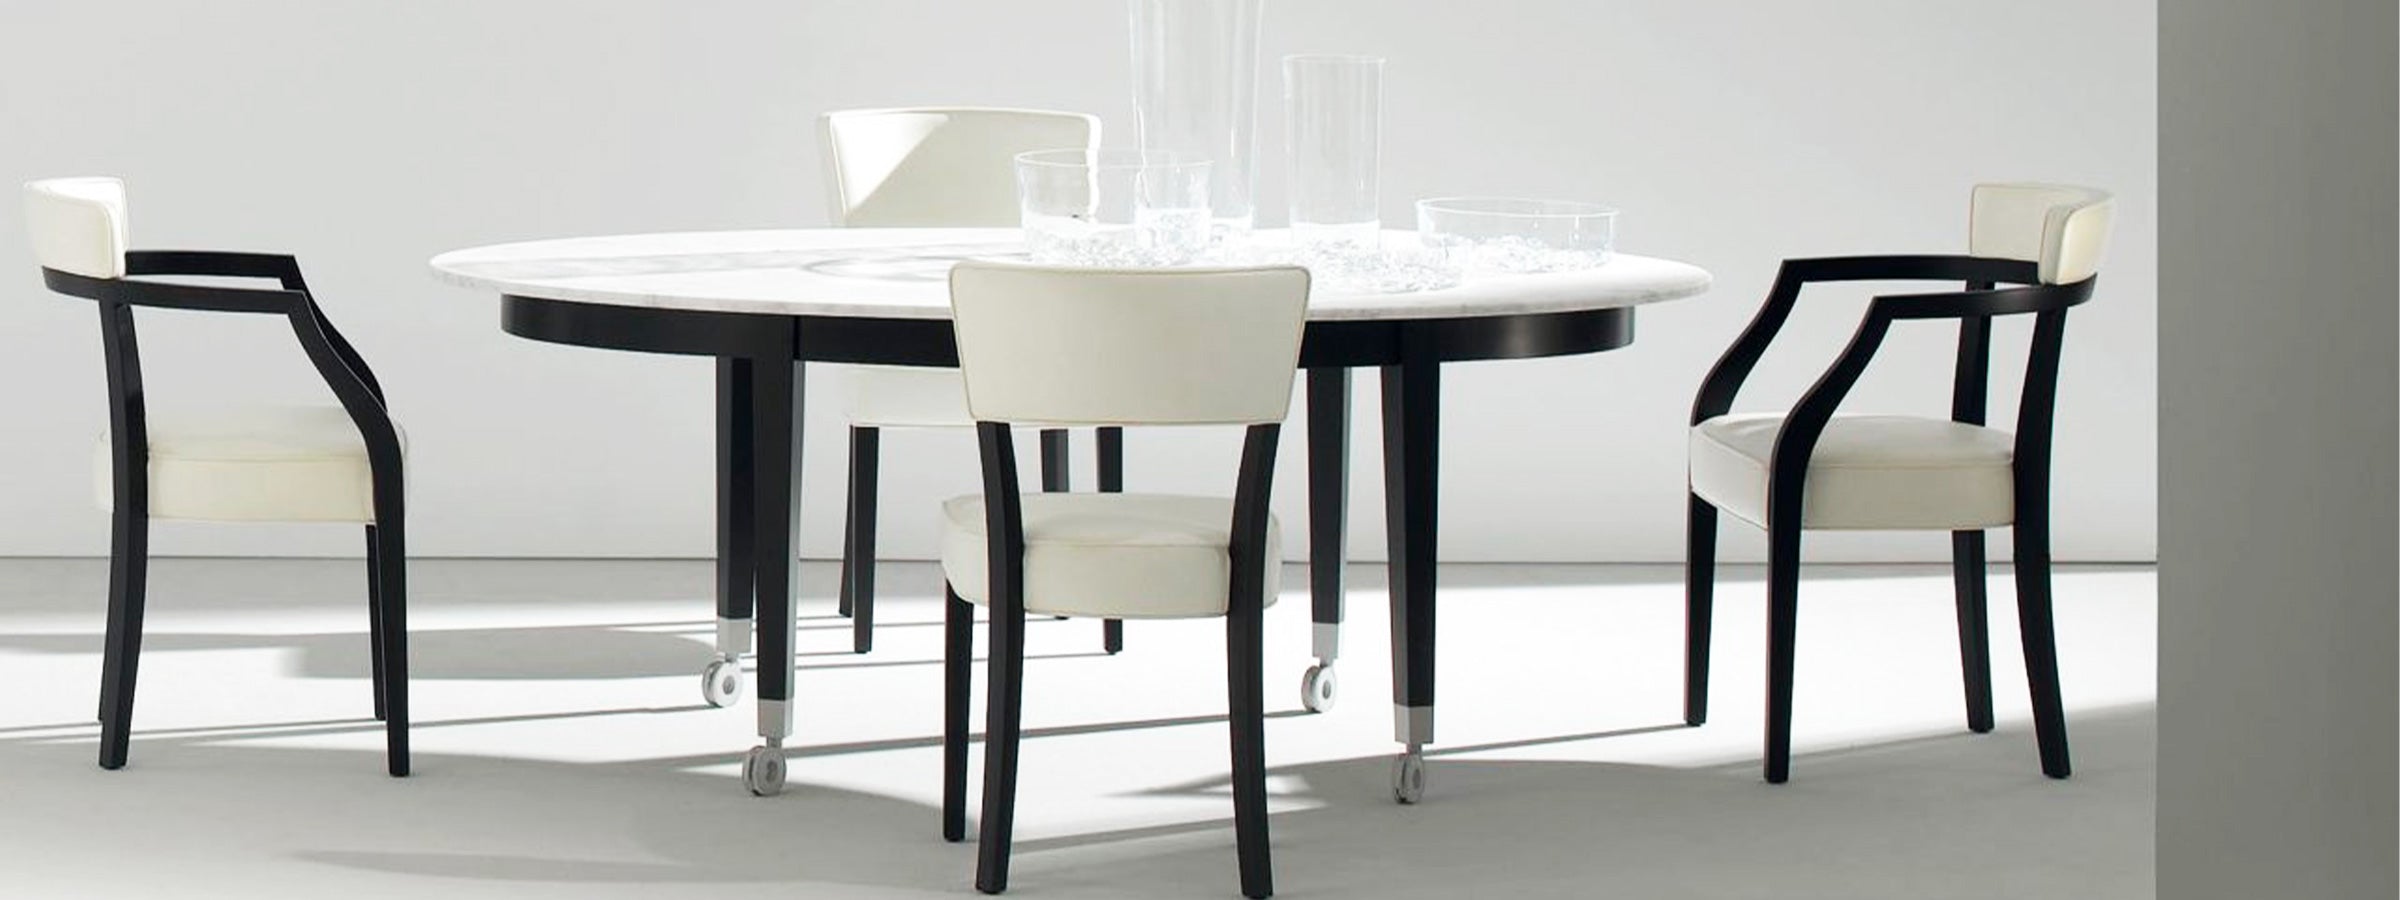 NEOZ by Philippe Starck for Driade - Design Italy